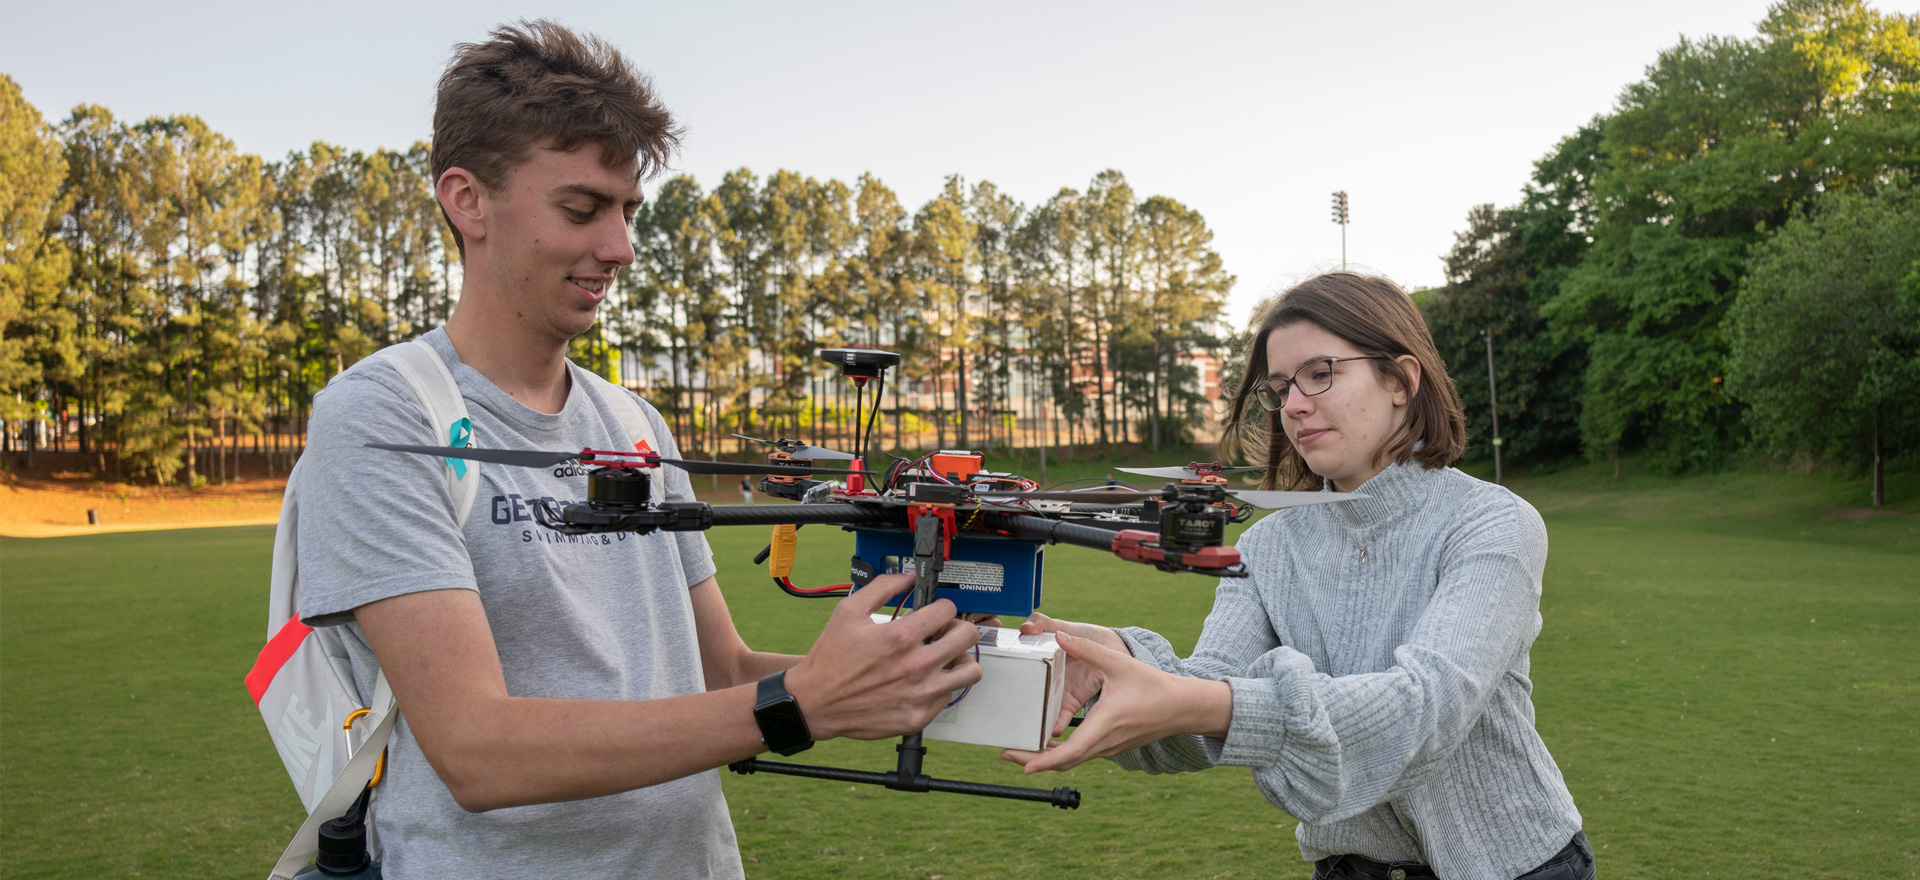 Male student holds drone while female student adjust package the drone carries. The scene is a green field outdoors, in the afternoon, with slightly overcast sky.